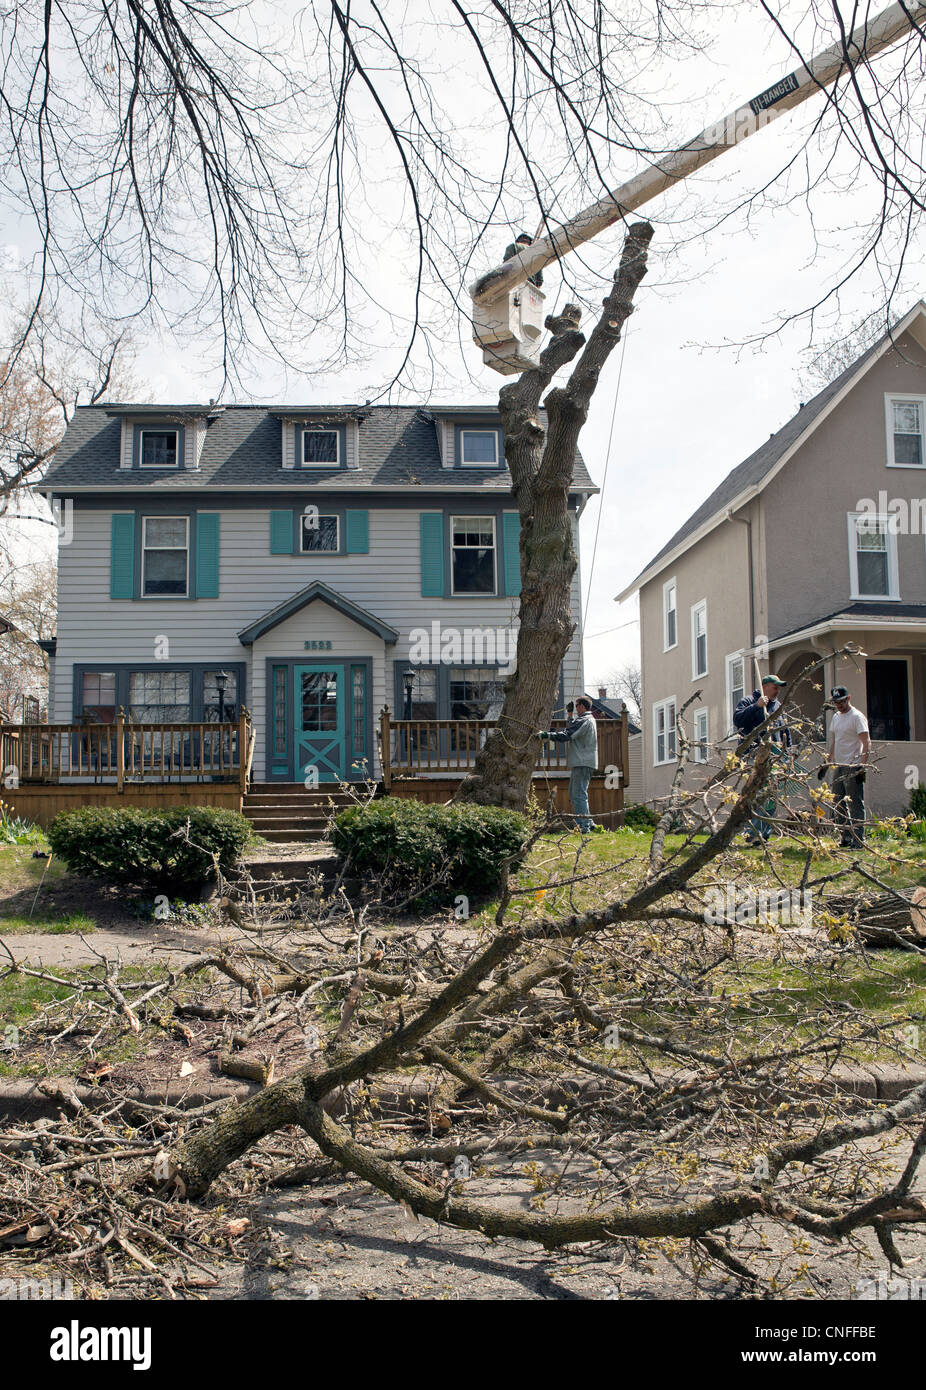 A tree is cut down in a front yard of a residence in the USA. Stock Photo